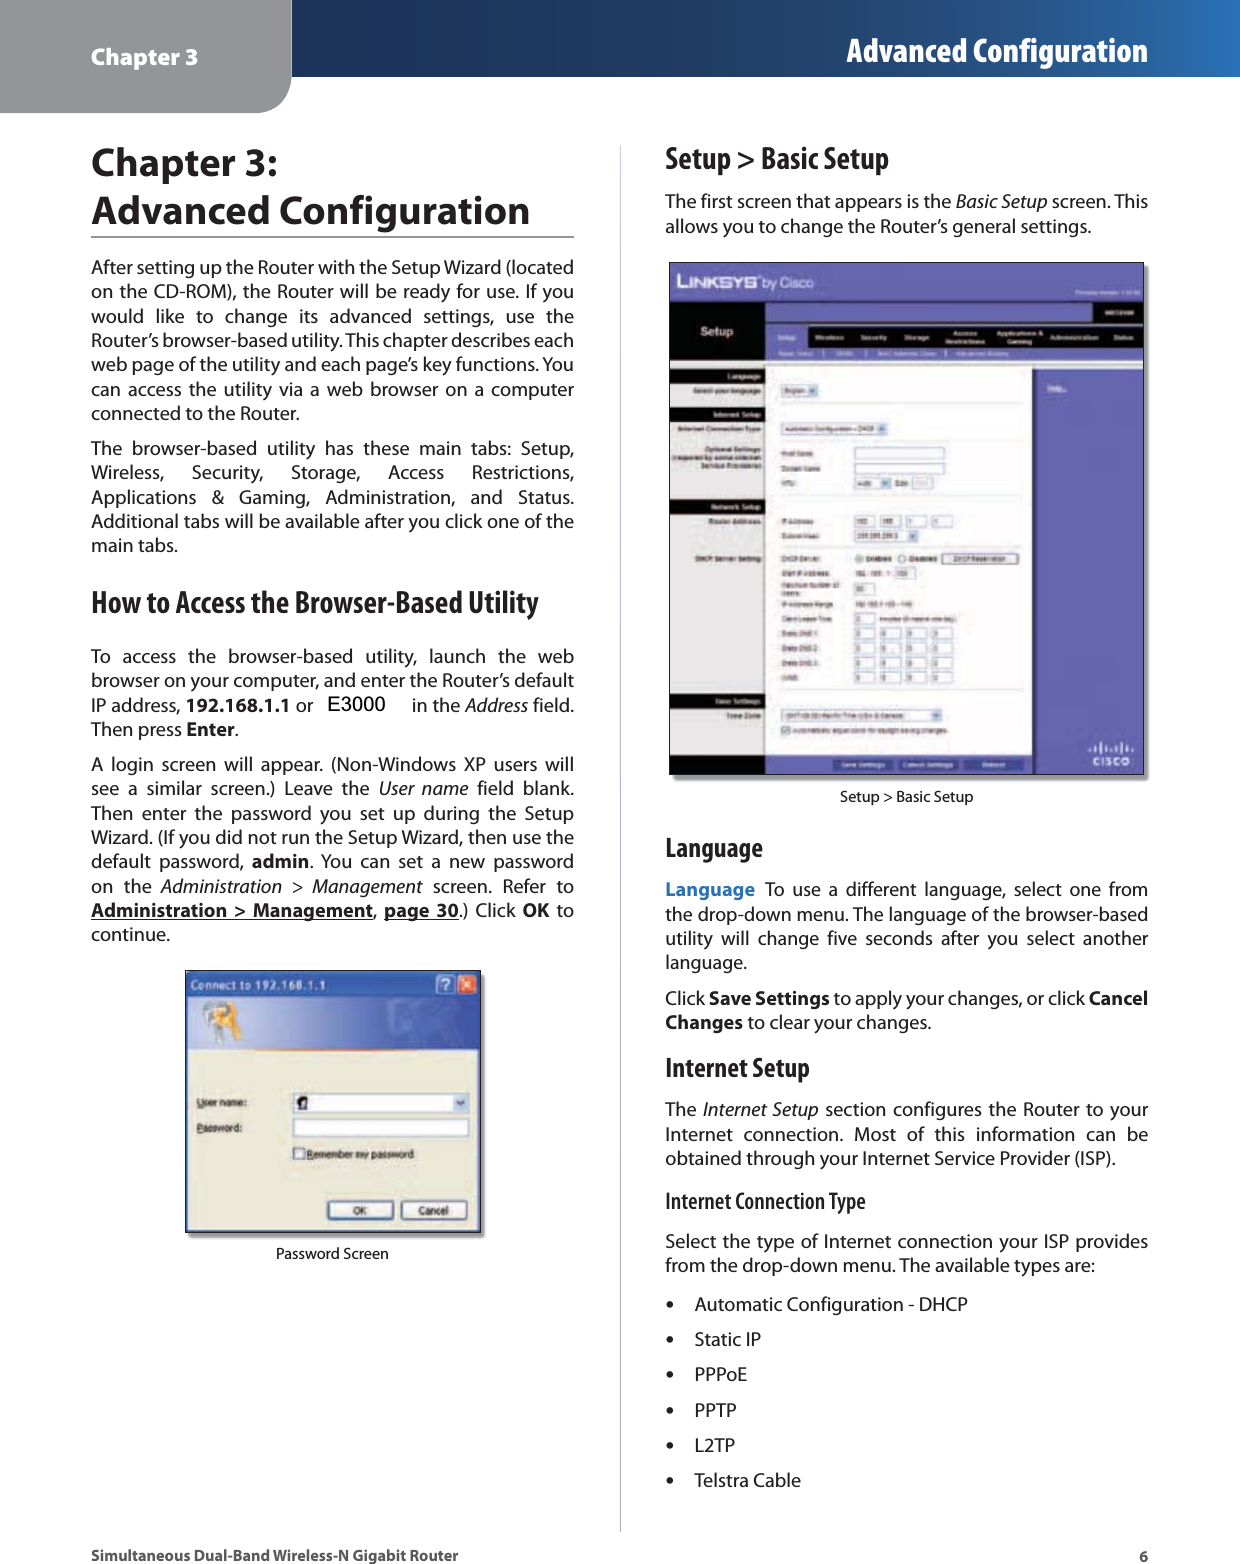 Chapter 3 Advanced Configuration6Simultaneous Dual-Band Wireless-N Gigabit RouterChapter 3: Advanced ConfigurationAfter setting up the Router with the Setup Wizard (located on the CD-ROM), the Router will be ready for use. If you would like to change its advanced settings, use the Router’s browser-based utility. This chapter describes each web page of the utility and each page’s key functions. You can access the utility via a web browser on a computer connected to the Router.The browser-based utility has these main tabs: Setup, Wireless, Security, Storage, Access Restrictions, Applications &amp; Gaming, Administration, and Status. Additional tabs will be available after you click one of the main tabs.How to Access the Browser-Based UtilityTo access the browser-based utility, launch the web browser on your computer, and enter the Router’s default IP address, 192.168.1.1 or WRT610N in the Address field. Then press Enter.A login screen will appear. (Non-Windows XP users will see a similar screen.) Leave the User name field blank. Then enter the password you set up during the Setup Wizard. (If you did not run the Setup Wizard, then use the default password, admin. You can set a new password on the Administration &gt; Management screen. Refer to Administration &gt; Management,  page 30.) Click OK to continue.Password ScreenSetup &gt; Basic SetupThe first screen that appears is the Basic Setup screen. This allows you to change the Router’s general settings. Setup &gt; Basic SetupLanguageLanguage To use a different language, select one from the drop-down menu. The language of the browser-based utility will change five seconds after you select another language.Click Save Settings to apply your changes, or click Cancel Changes to clear your changes.Internet SetupThe Internet Setup section configures the Router to your Internet connection. Most of this information can be obtained through your Internet Service Provider (ISP).Internet Connection TypeSelect the type of Internet connection your ISP provides from the drop-down menu. The available types are:sAutomatic Configuration - DHCPsStatic IPsPPPoEsPPTPsL2TPsTelstra Cable E3000